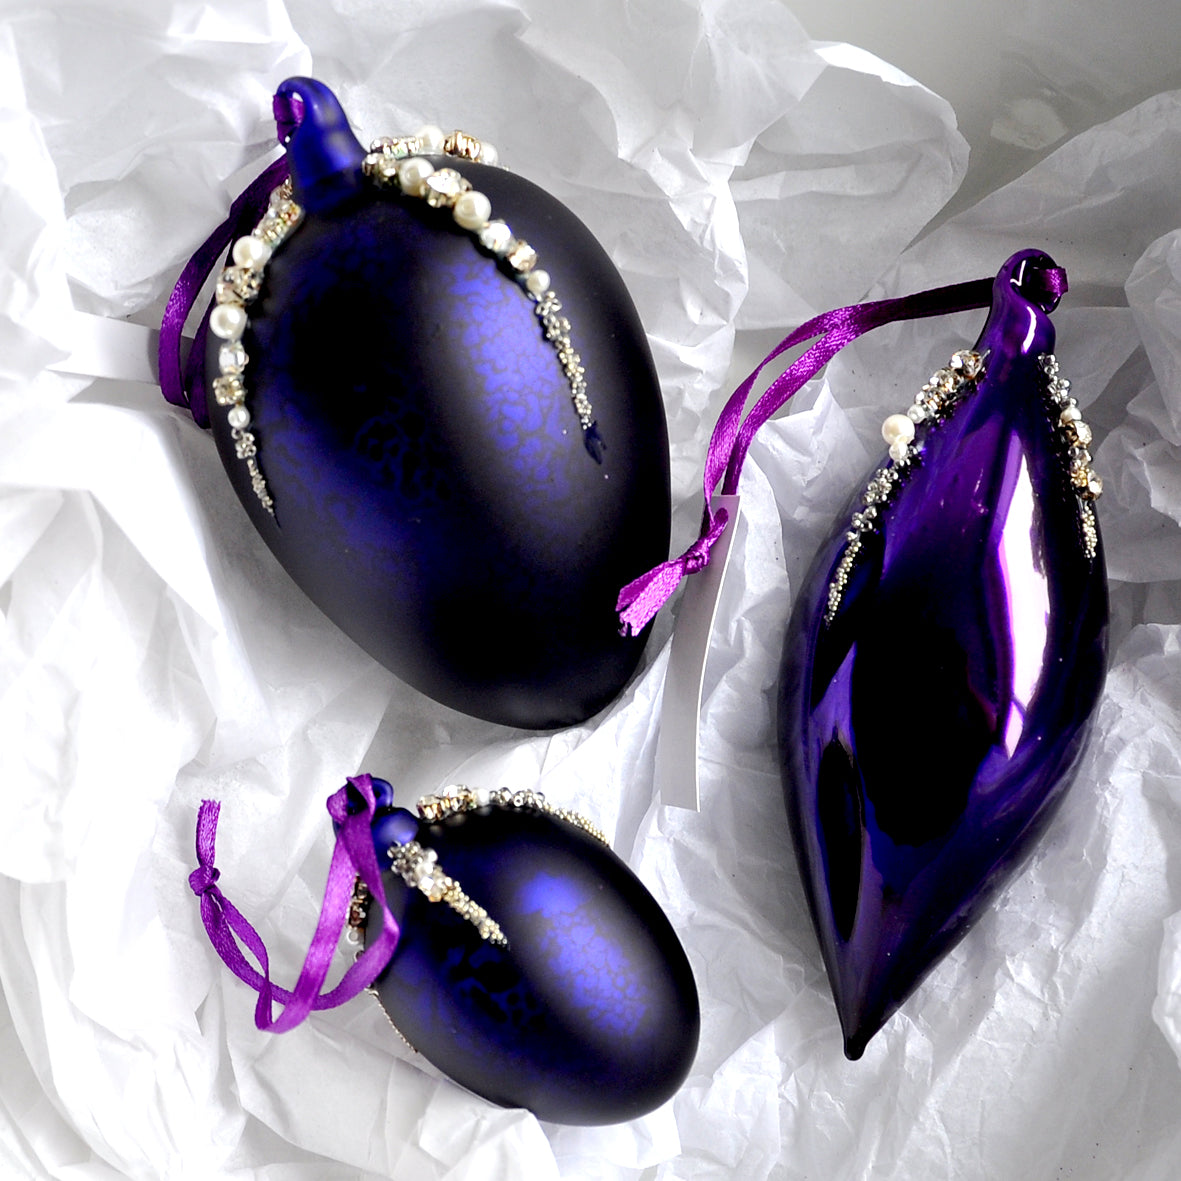 These matt aubergine purple egg shape Christmas ornament is made from glass and decorated with beads, pearls and diamonte.